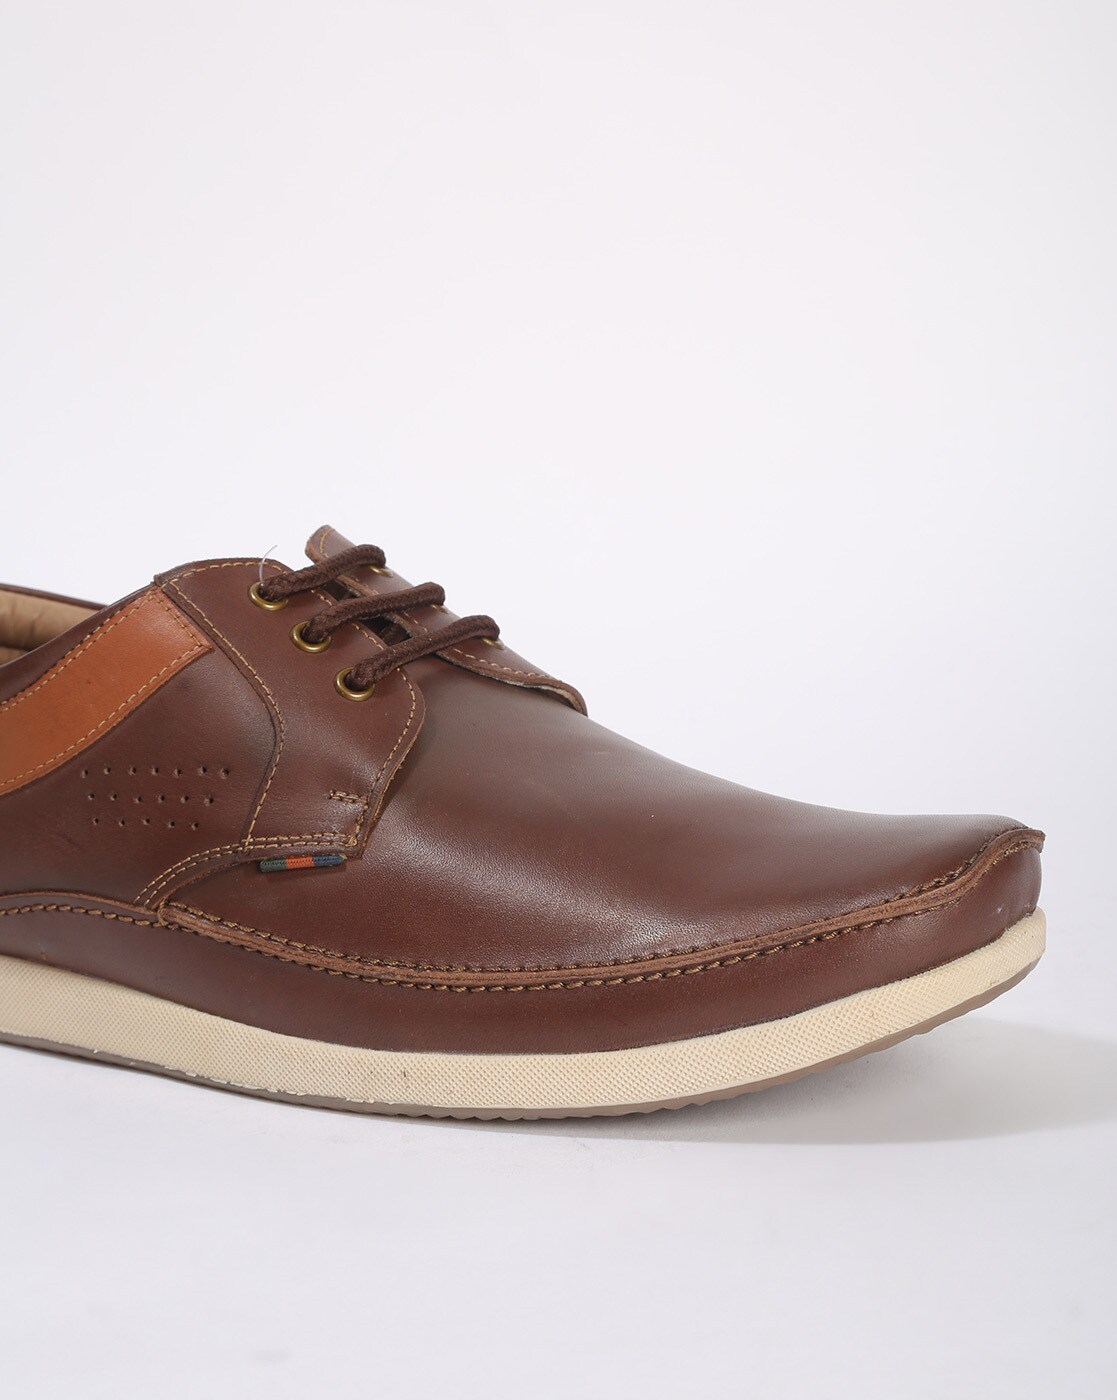 P.B.H. BROWN DERBY SHOES :: Online Shopping @ PARMAR BOOT HOUSE | Buy  Footwear For Men, Women & Kids